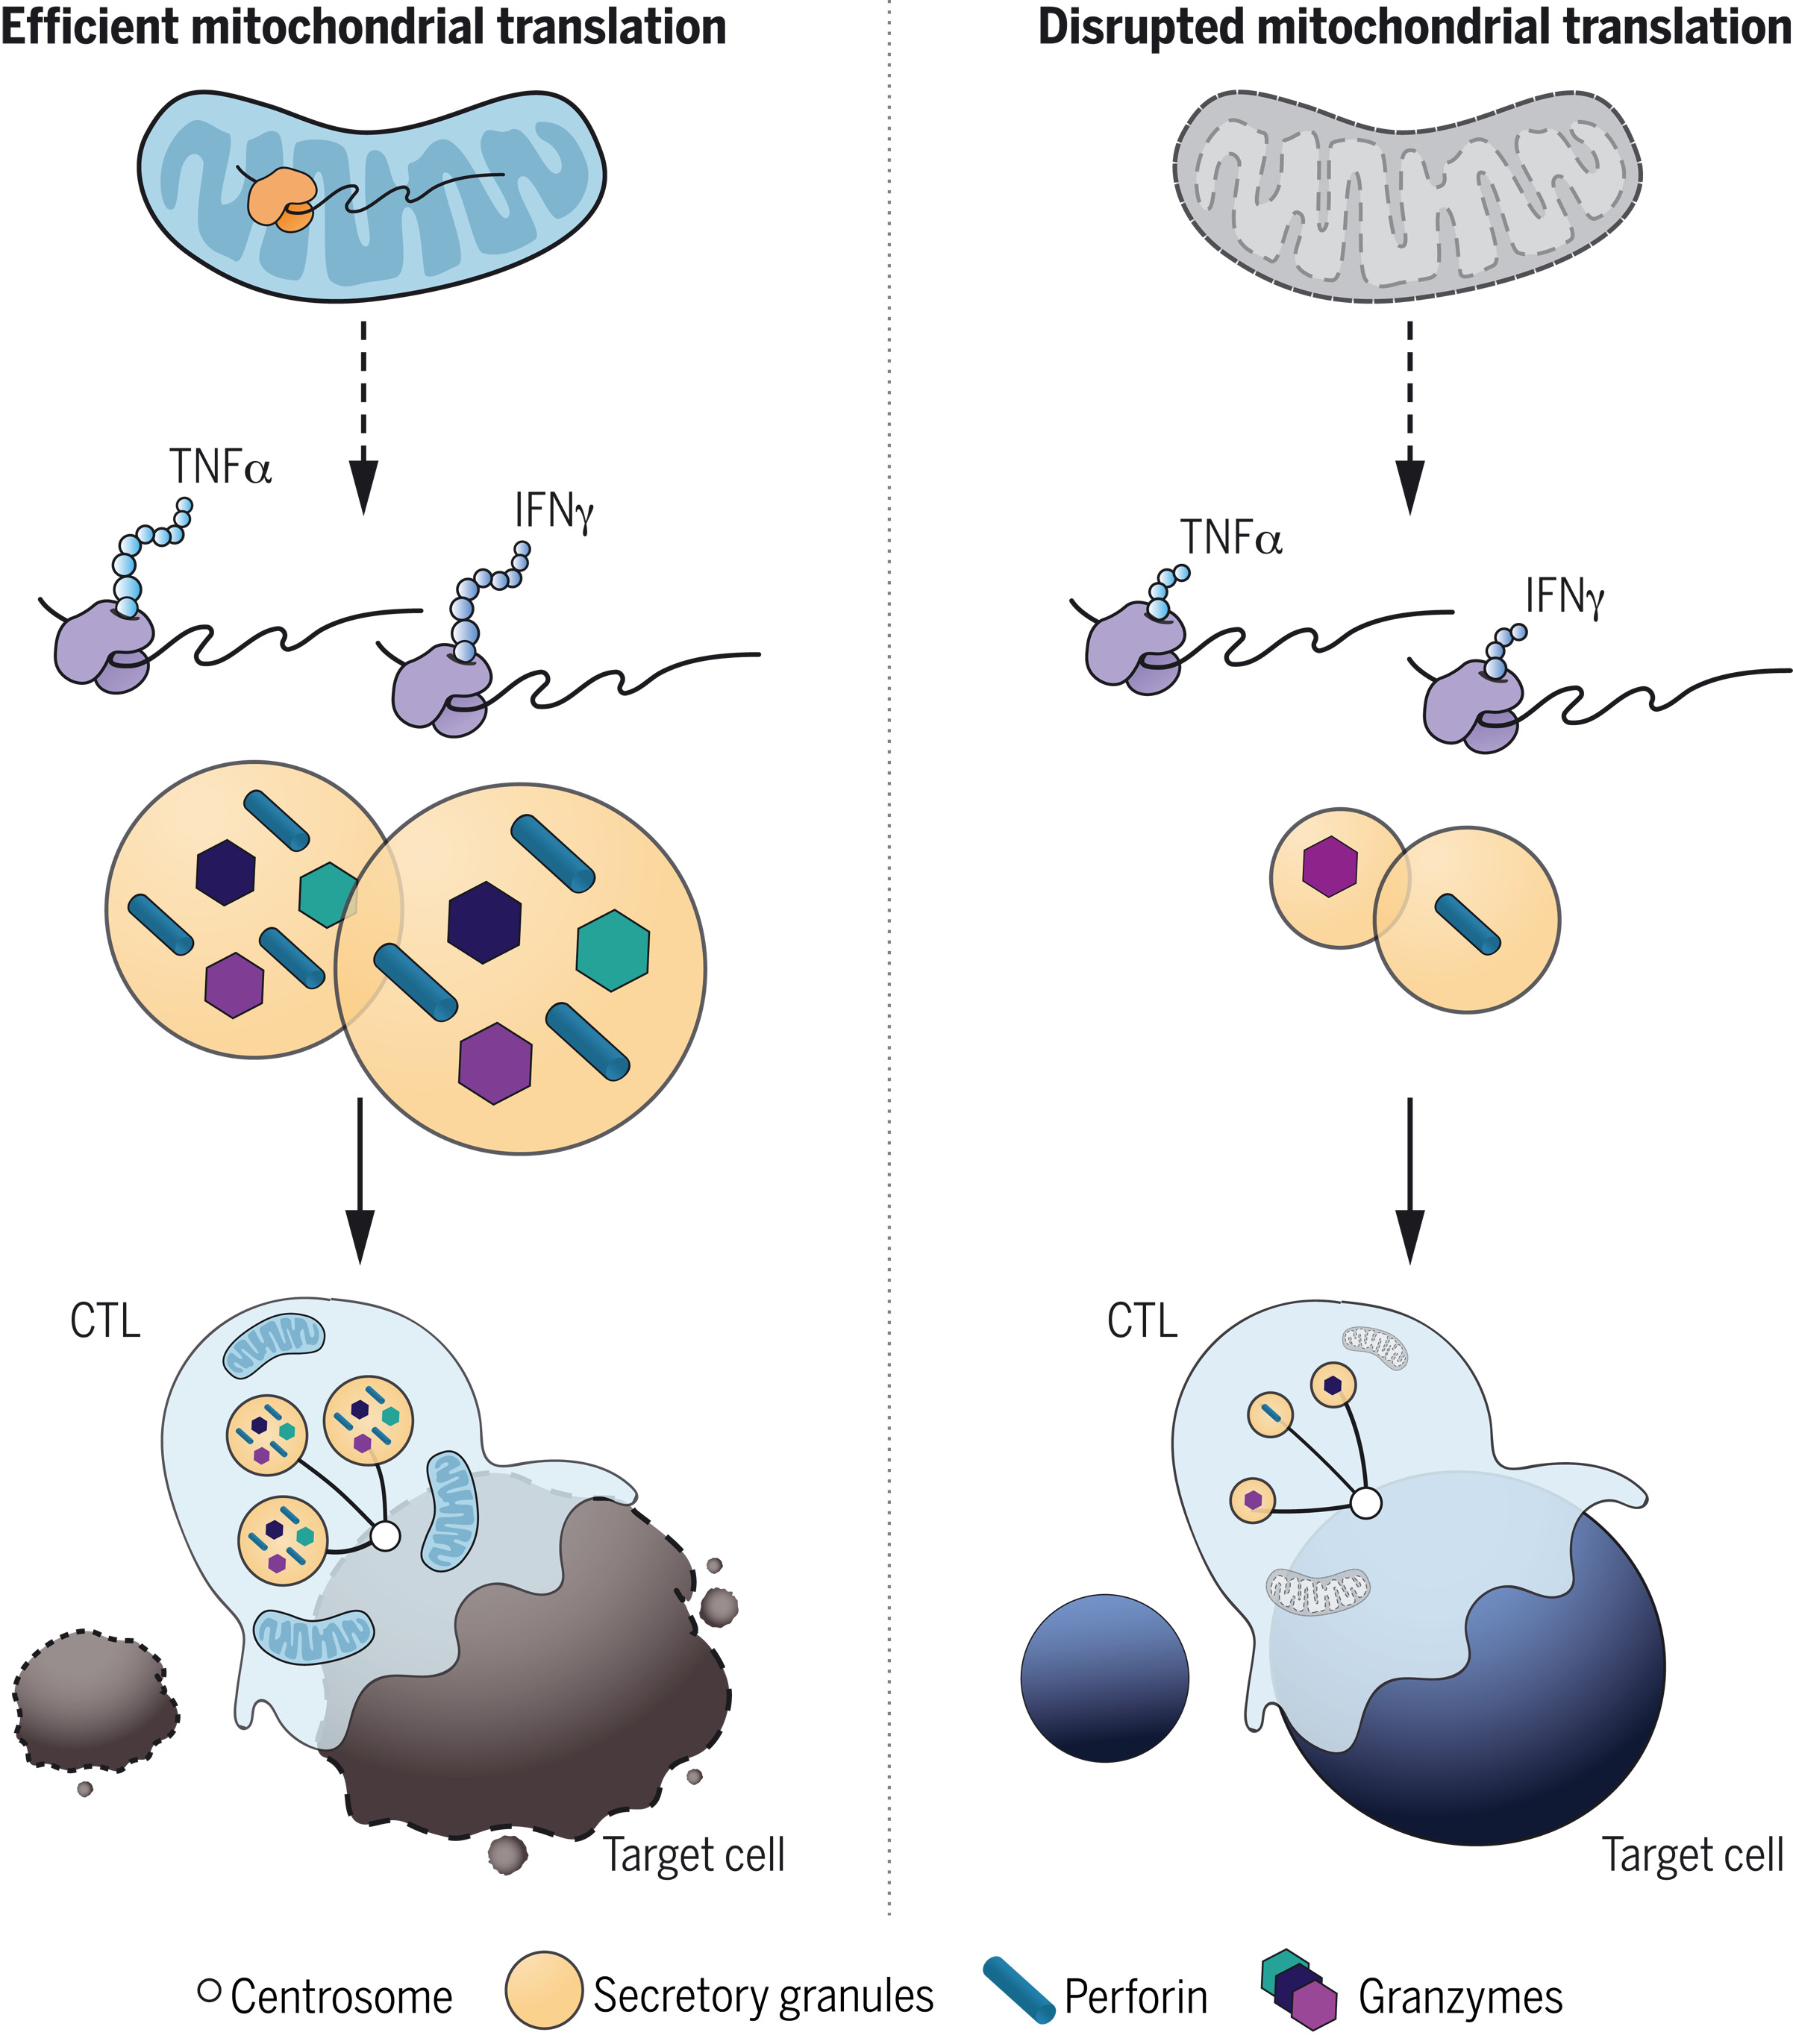 Mitochondrial translation is required for sustained killing by cytotoxic T cells